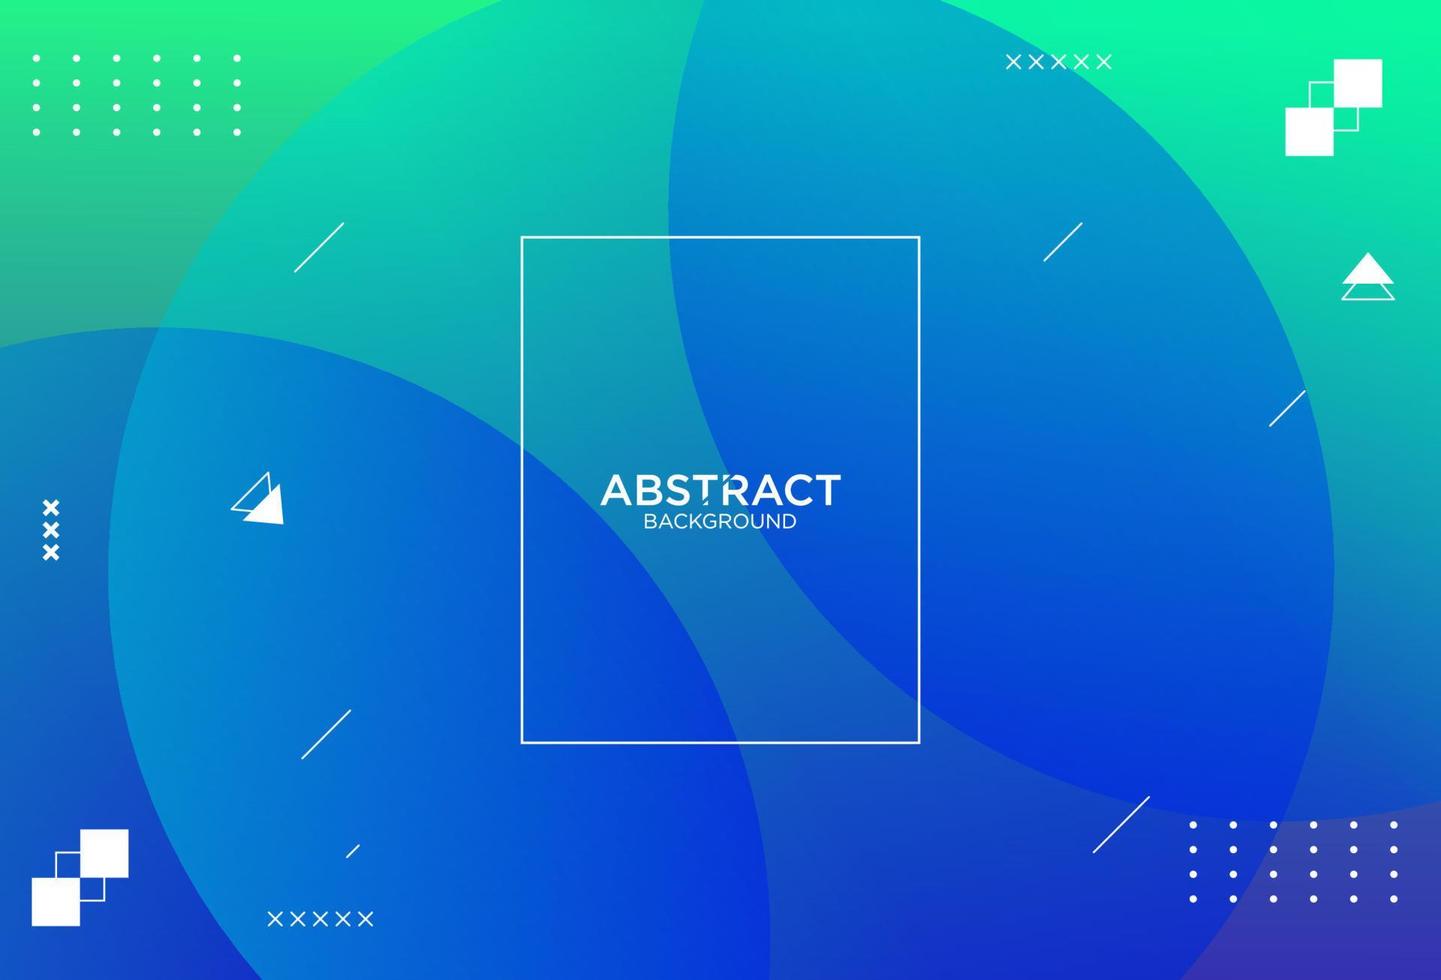 modern background, composition of trendy gradient shapes, liquid effect, abstract illustration. perfect design for your business. dynamic shape composition. vector